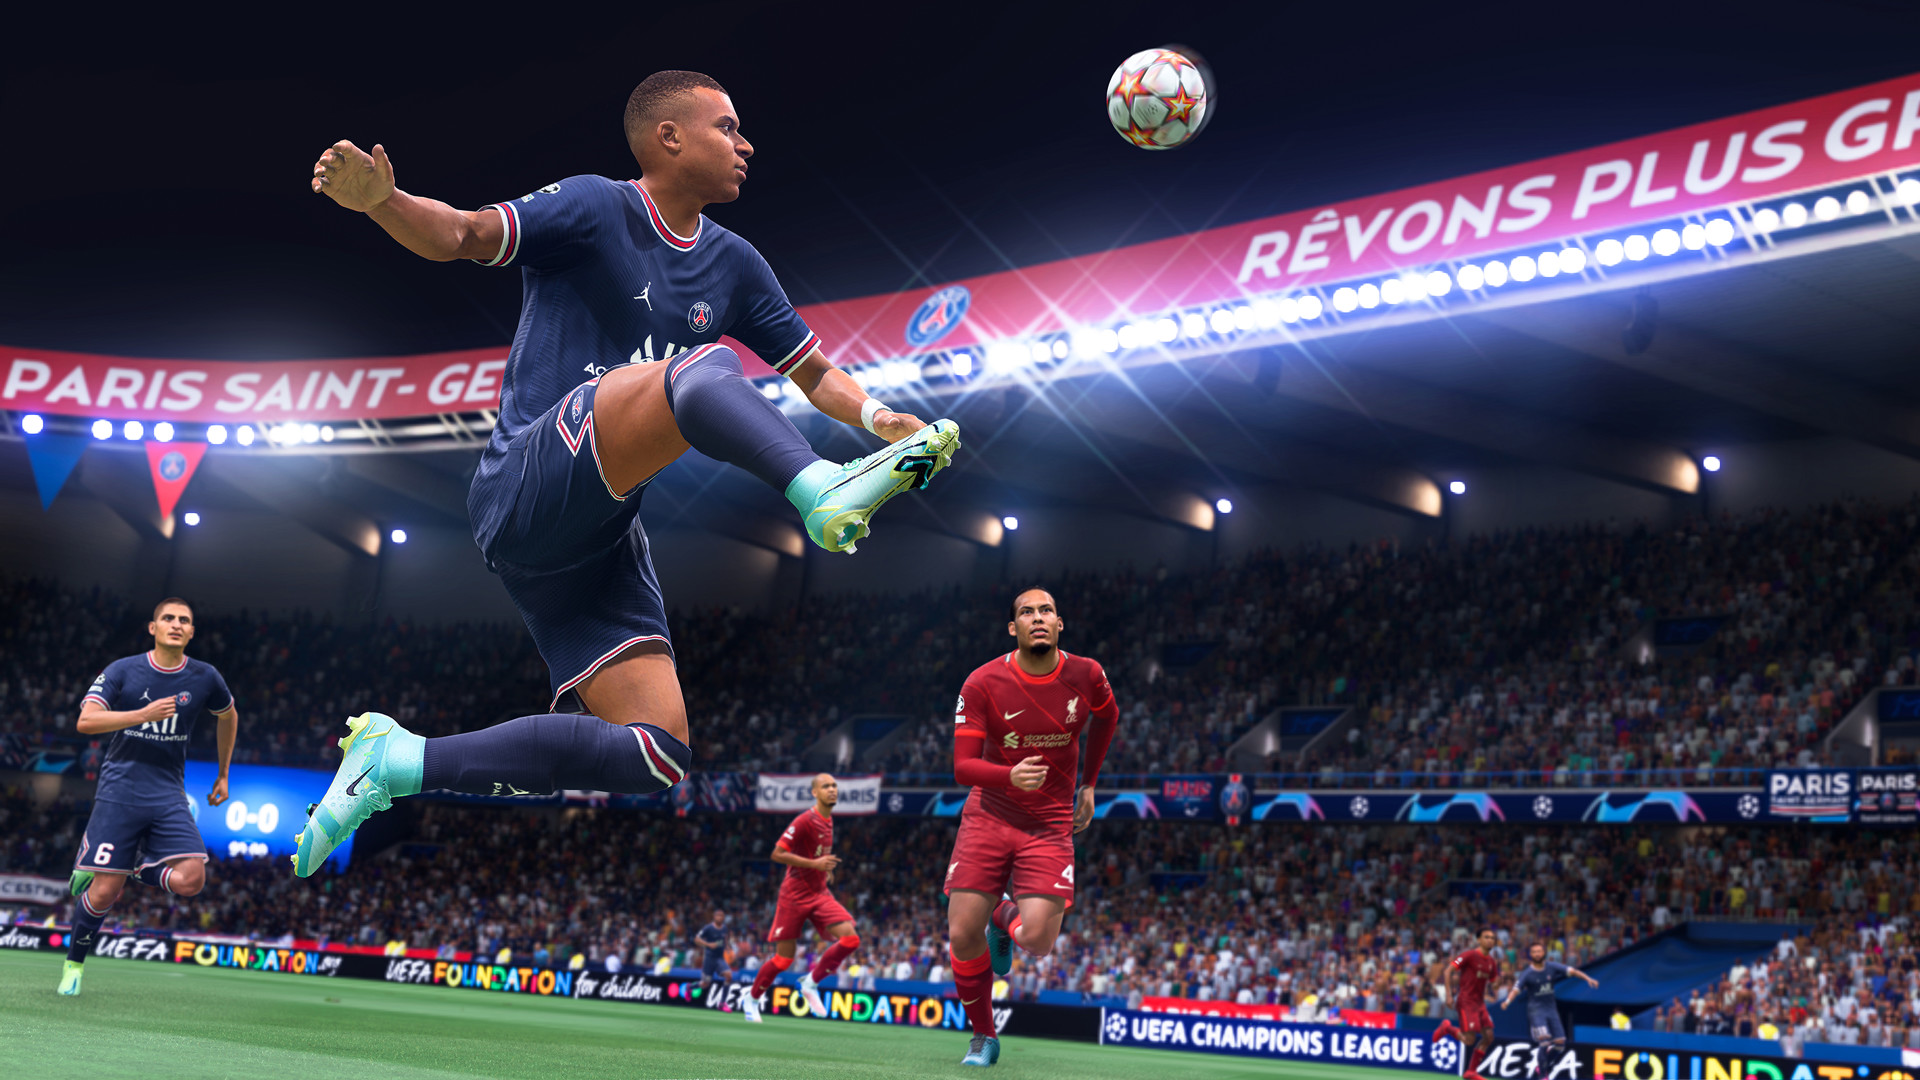 FIFA 23 On PS Plus: Expected Release Date